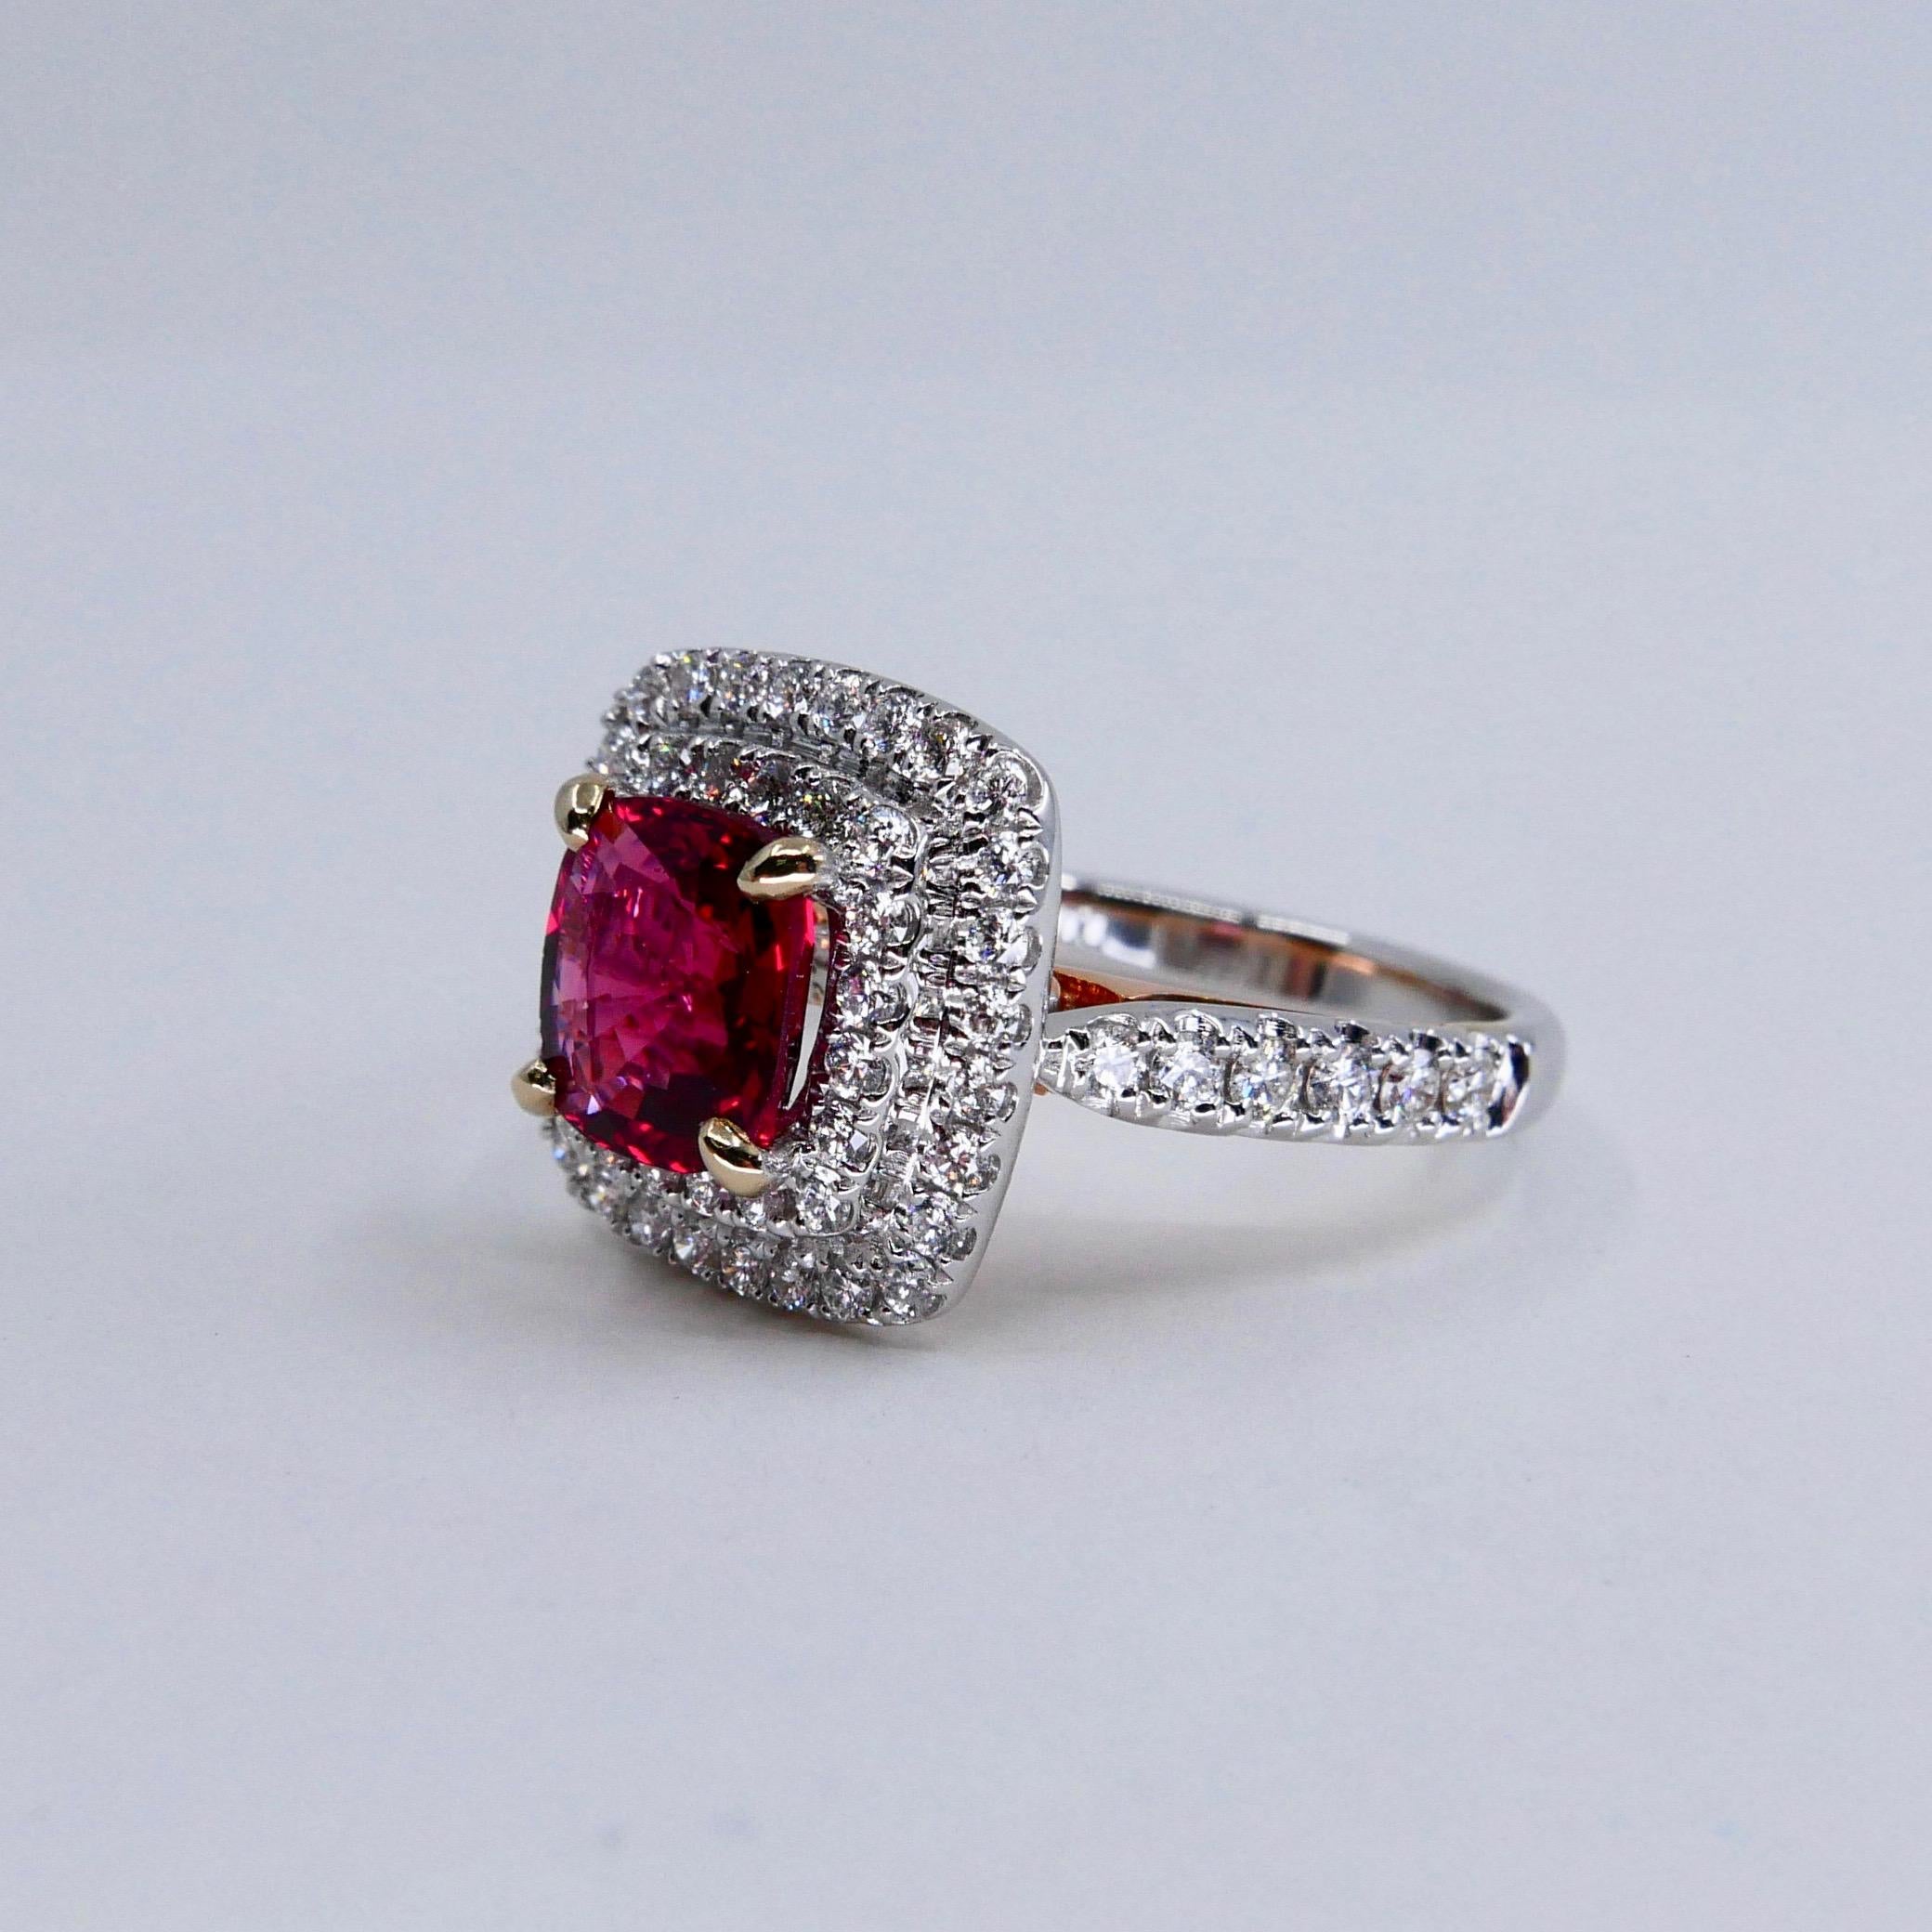 Natural Red Spinel 1.51 Carat and Diamond Ring 18K Two-Tone White and Rose Gold 5